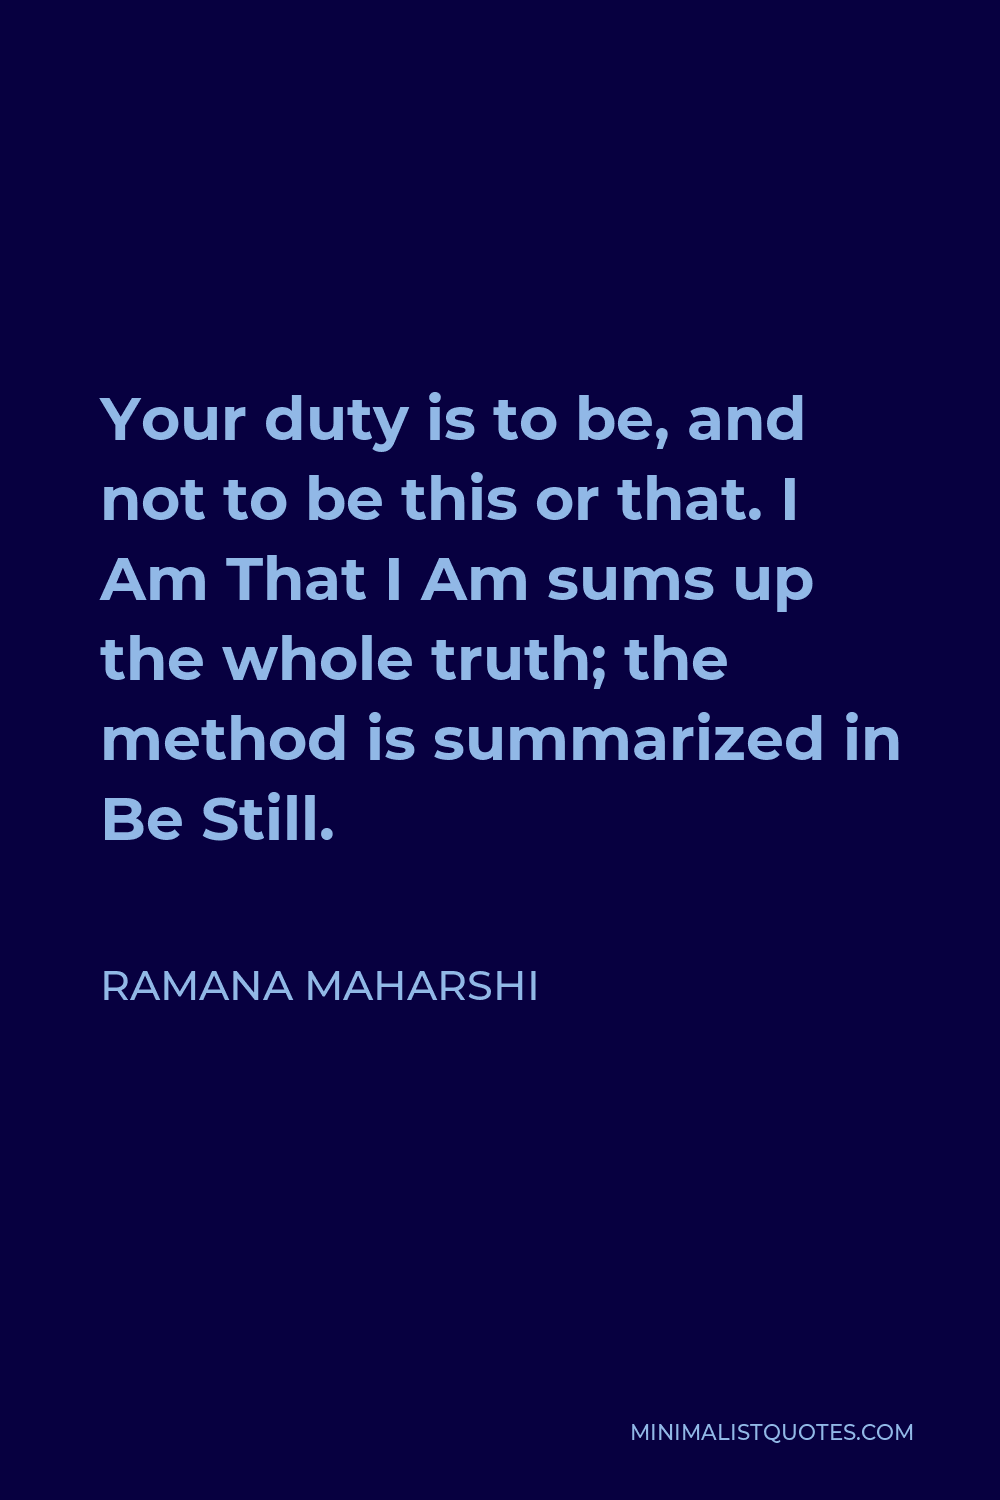 Ramana Maharshi Quote - Your duty is to Be, and not to be this or that.